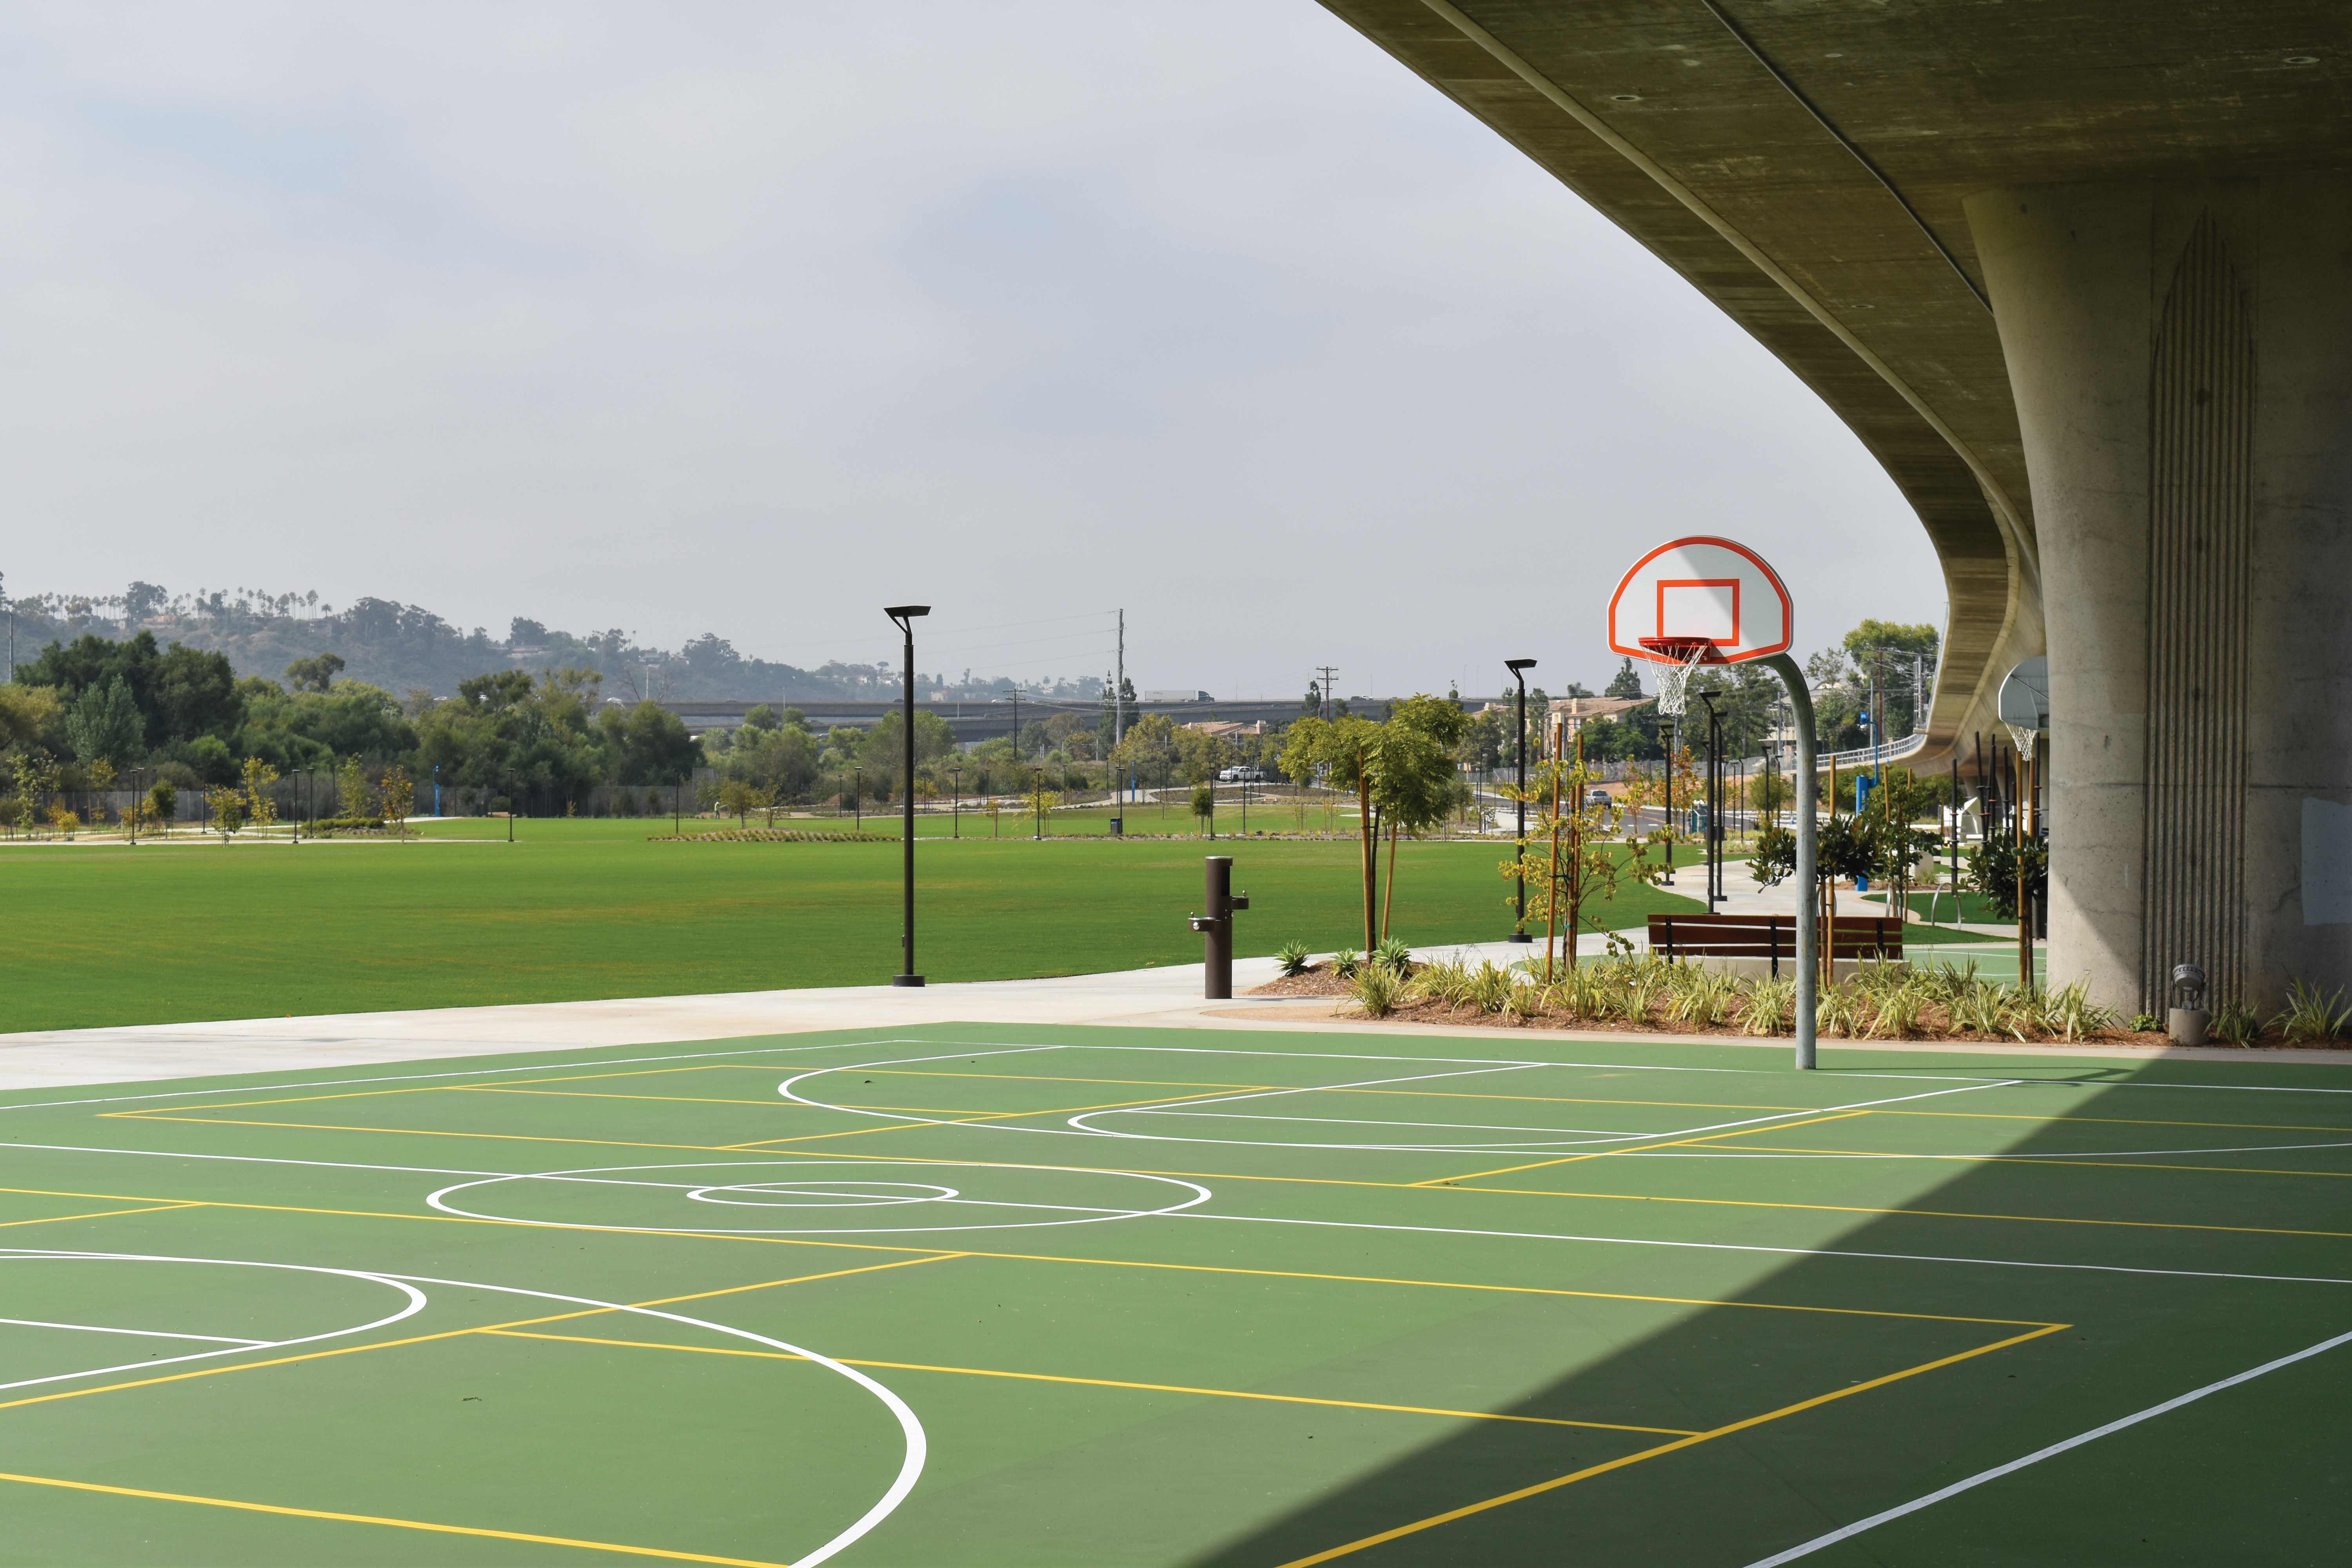 An image of the basketball courts